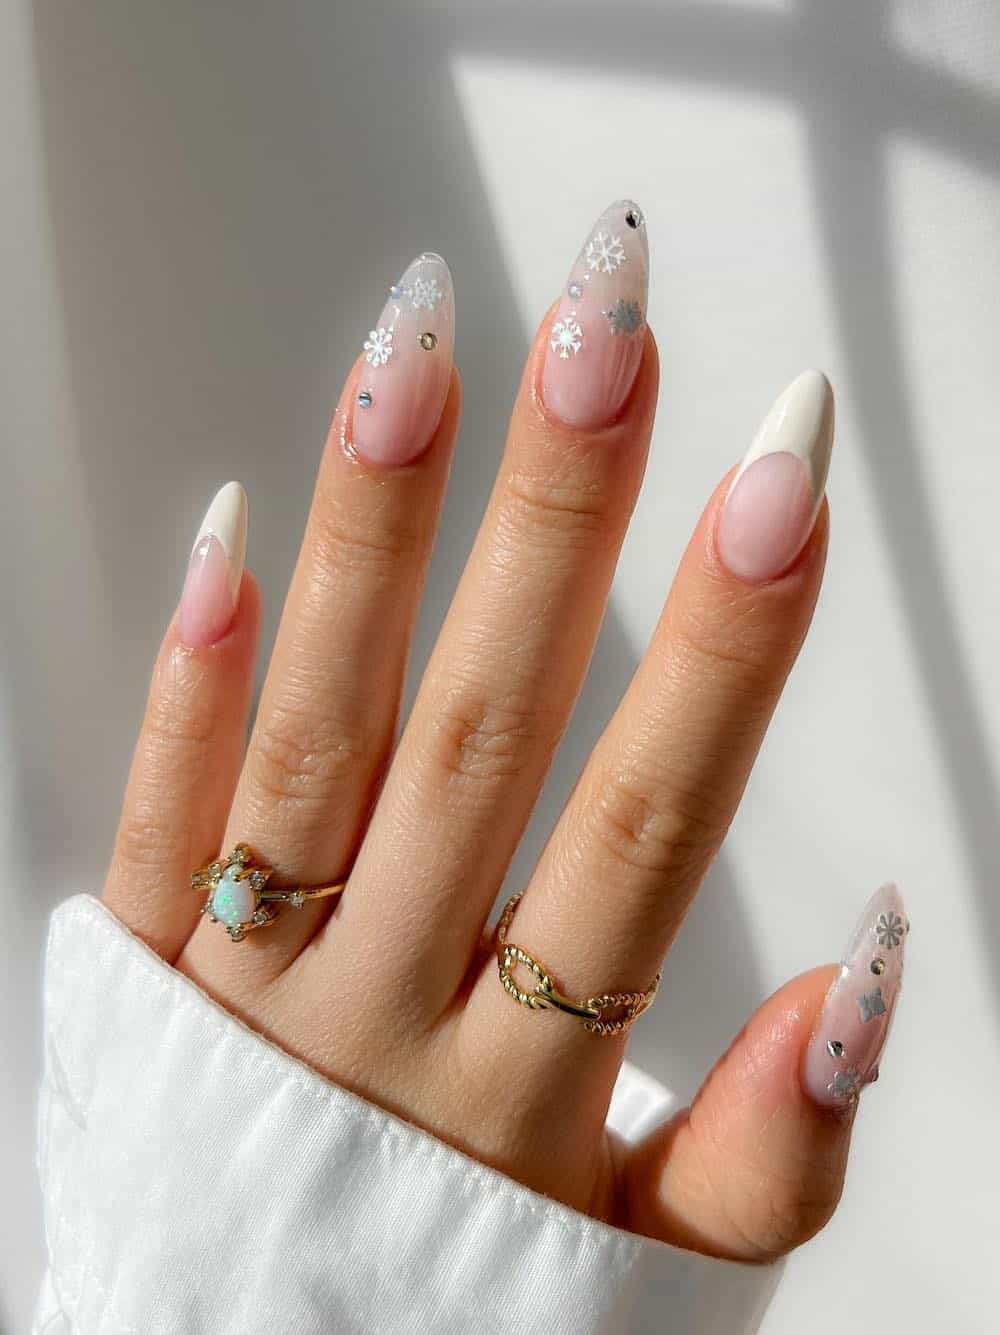 long milky white almond nails with snowflake embellishments and white tip accents